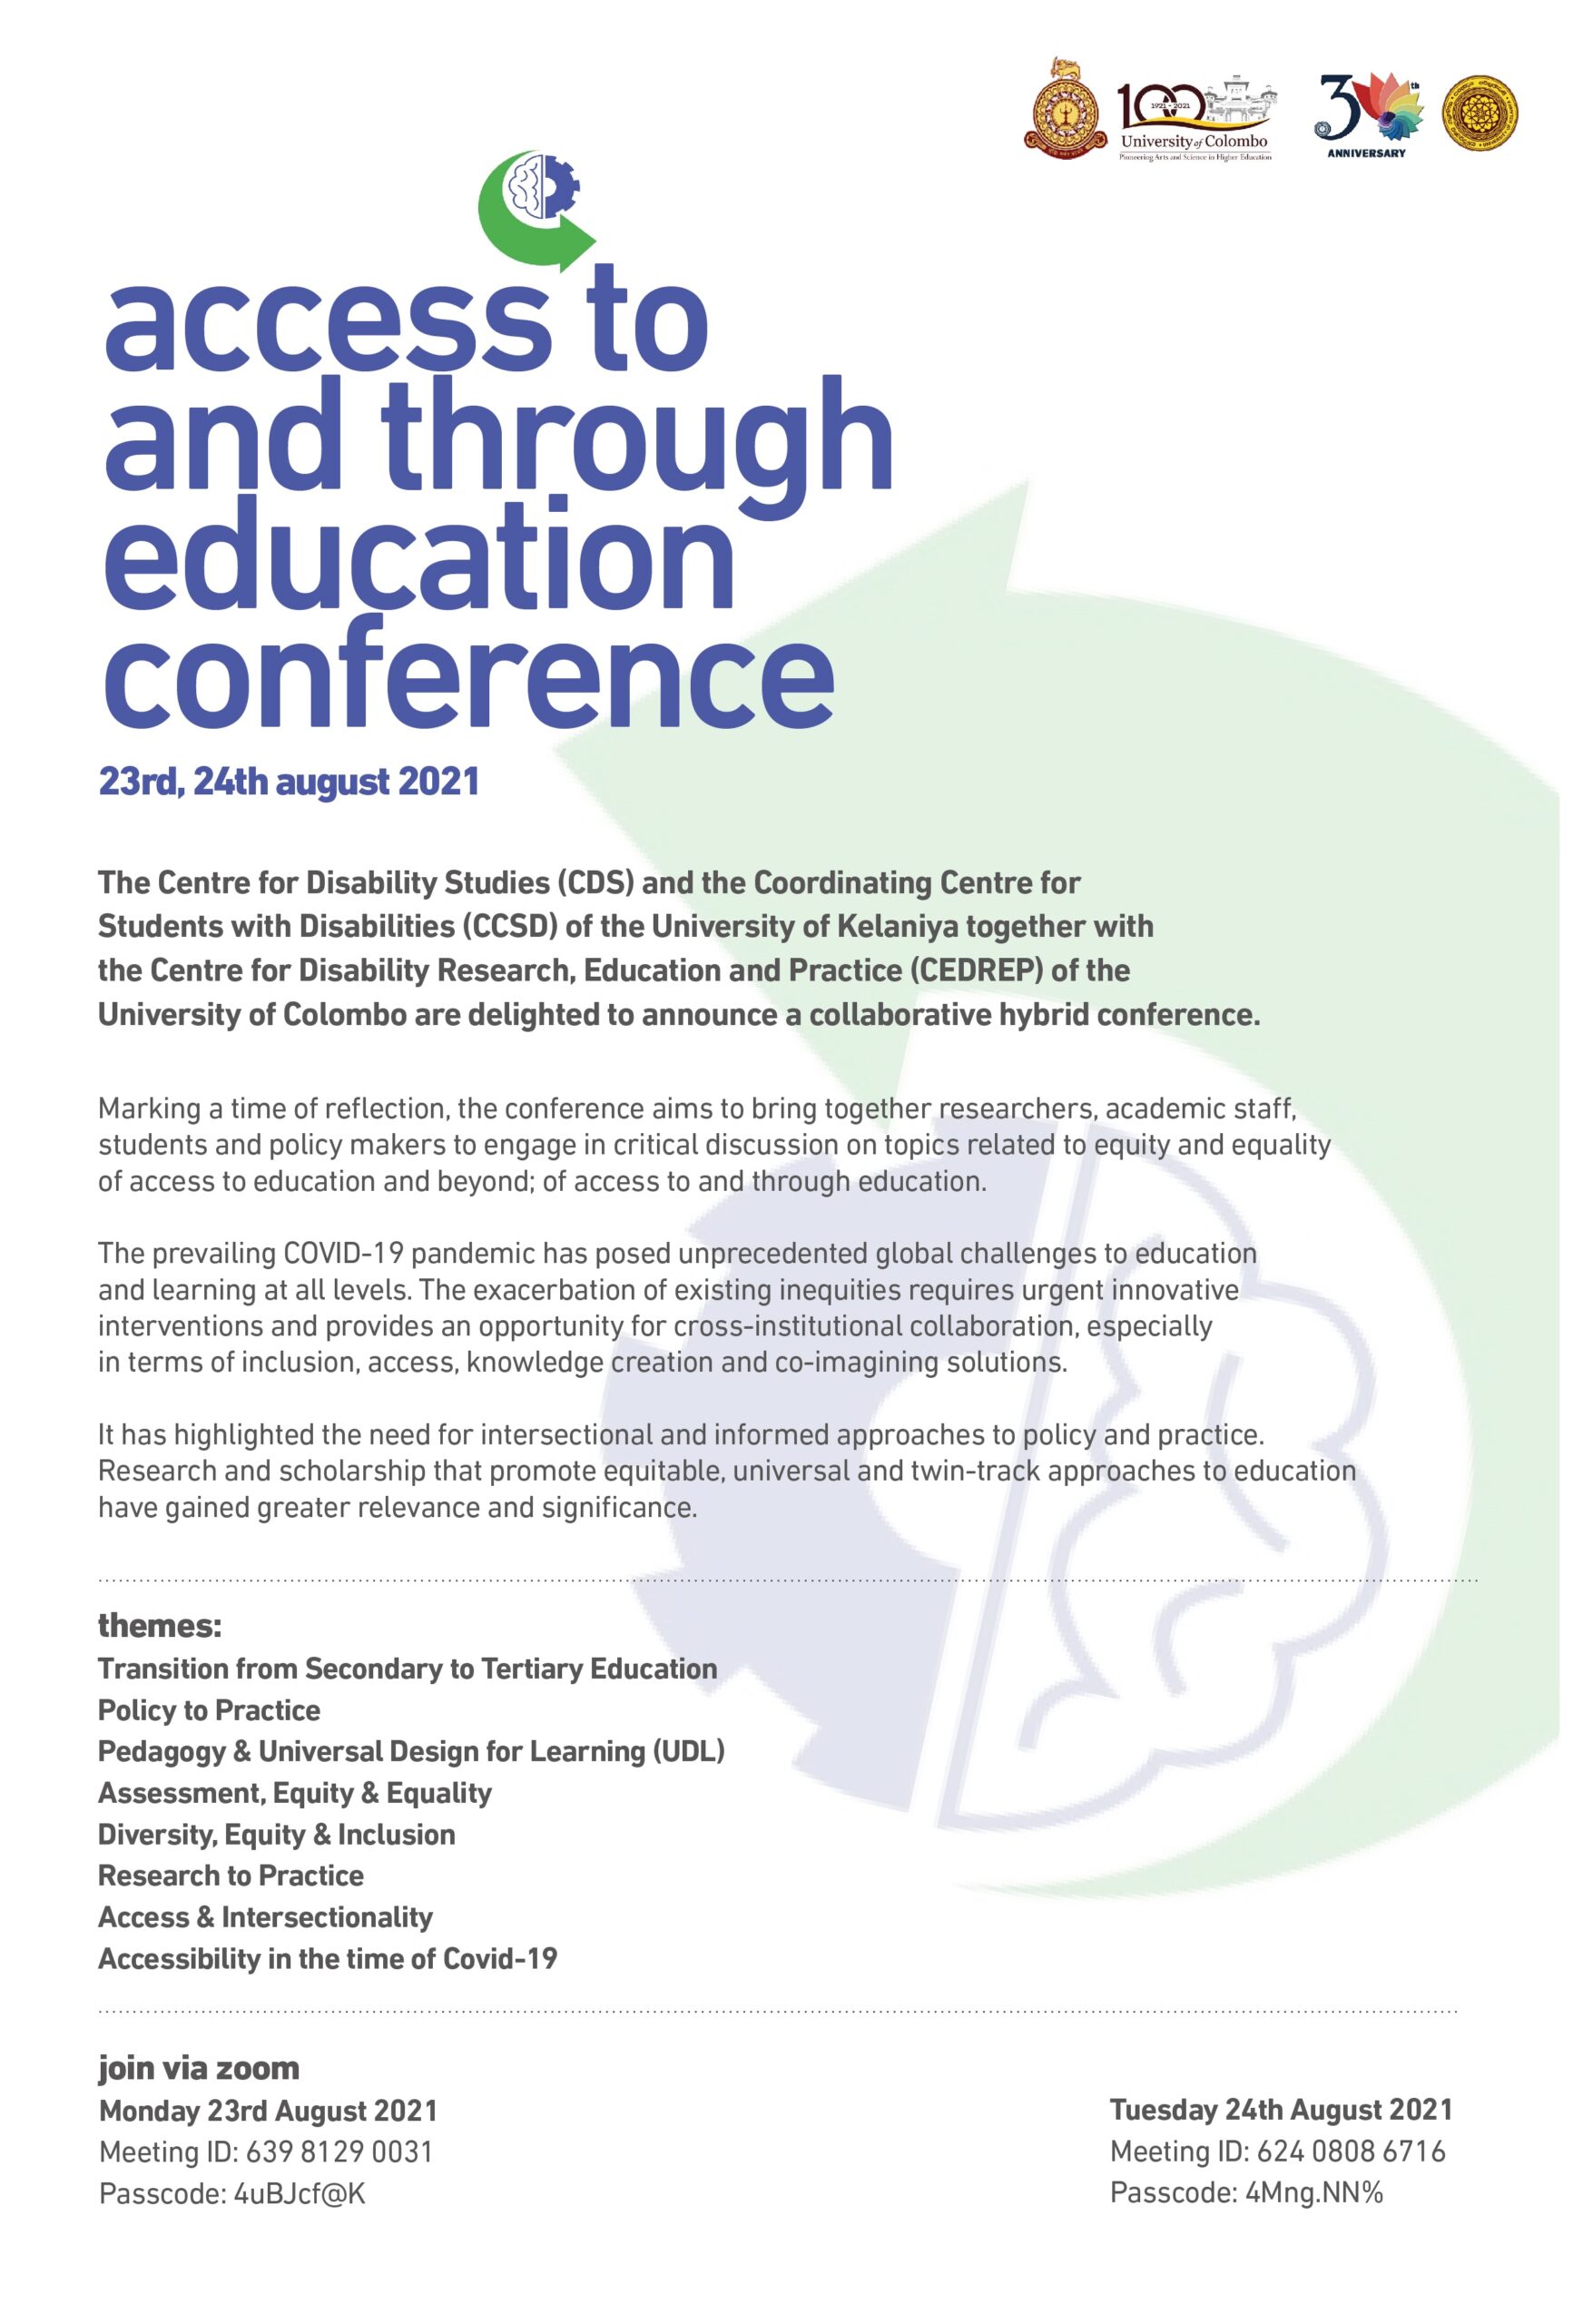 Access to and through Education Conference – 23rd and 24th Aug.